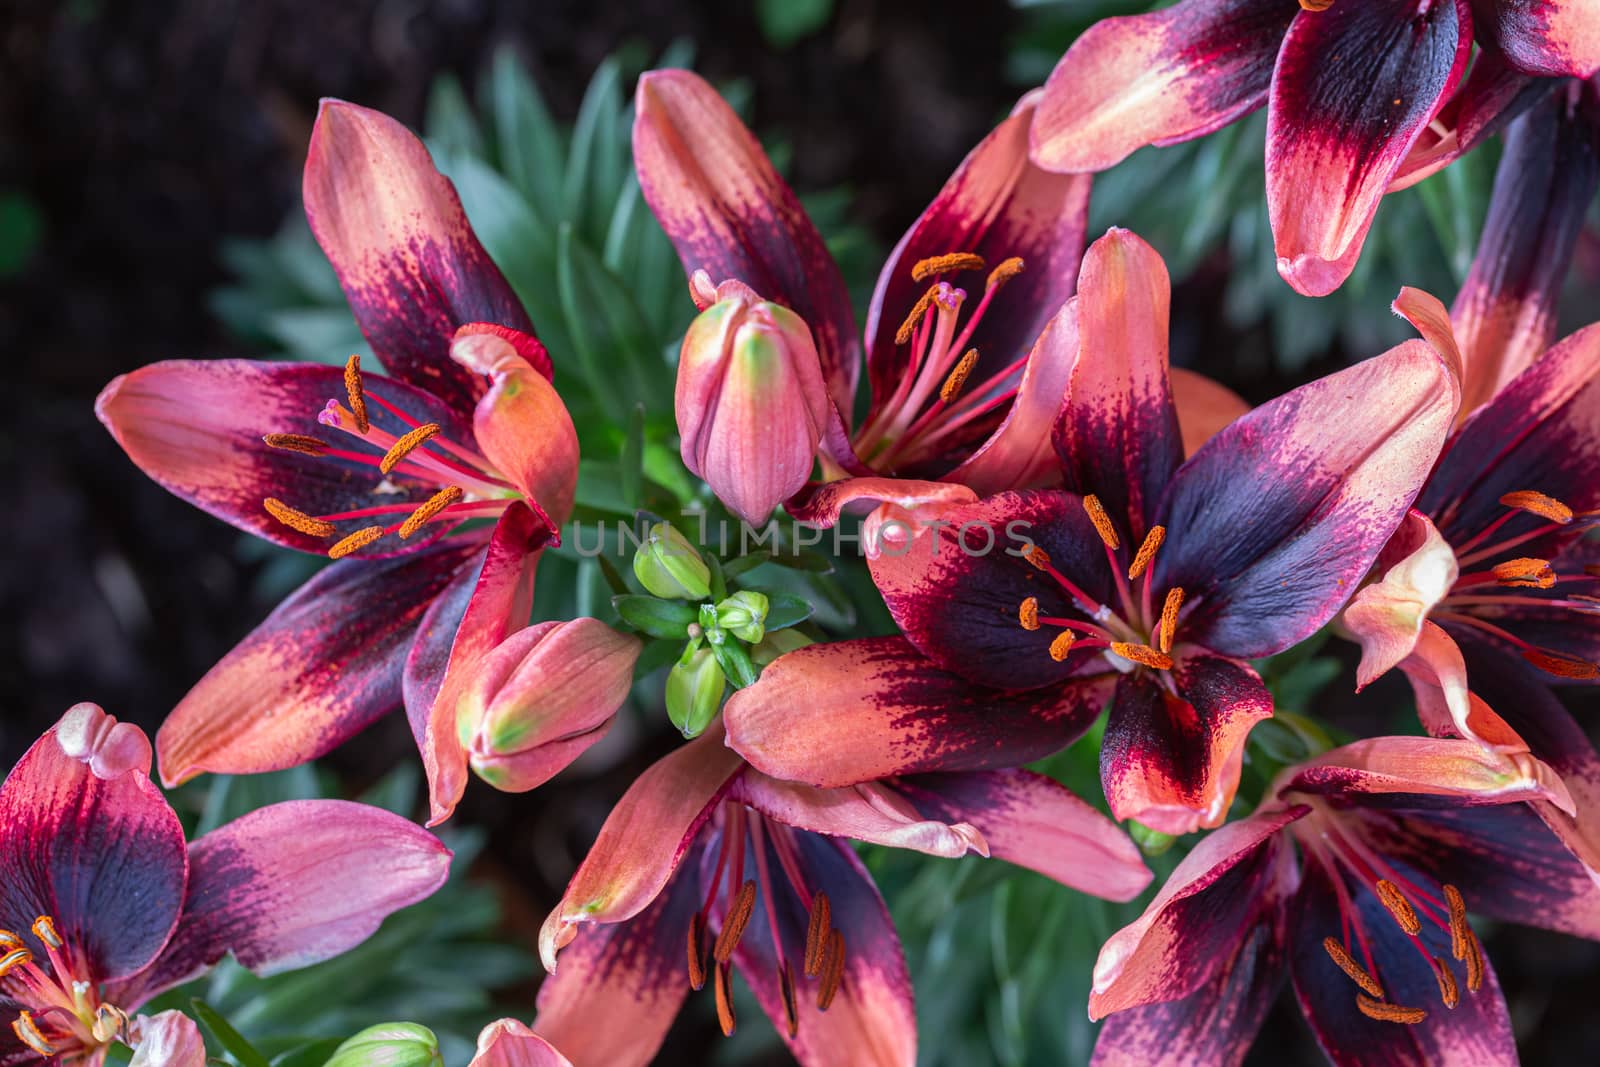 Asiatic lily or Asiatic lilies flower in garden at sunny summer or spring day.